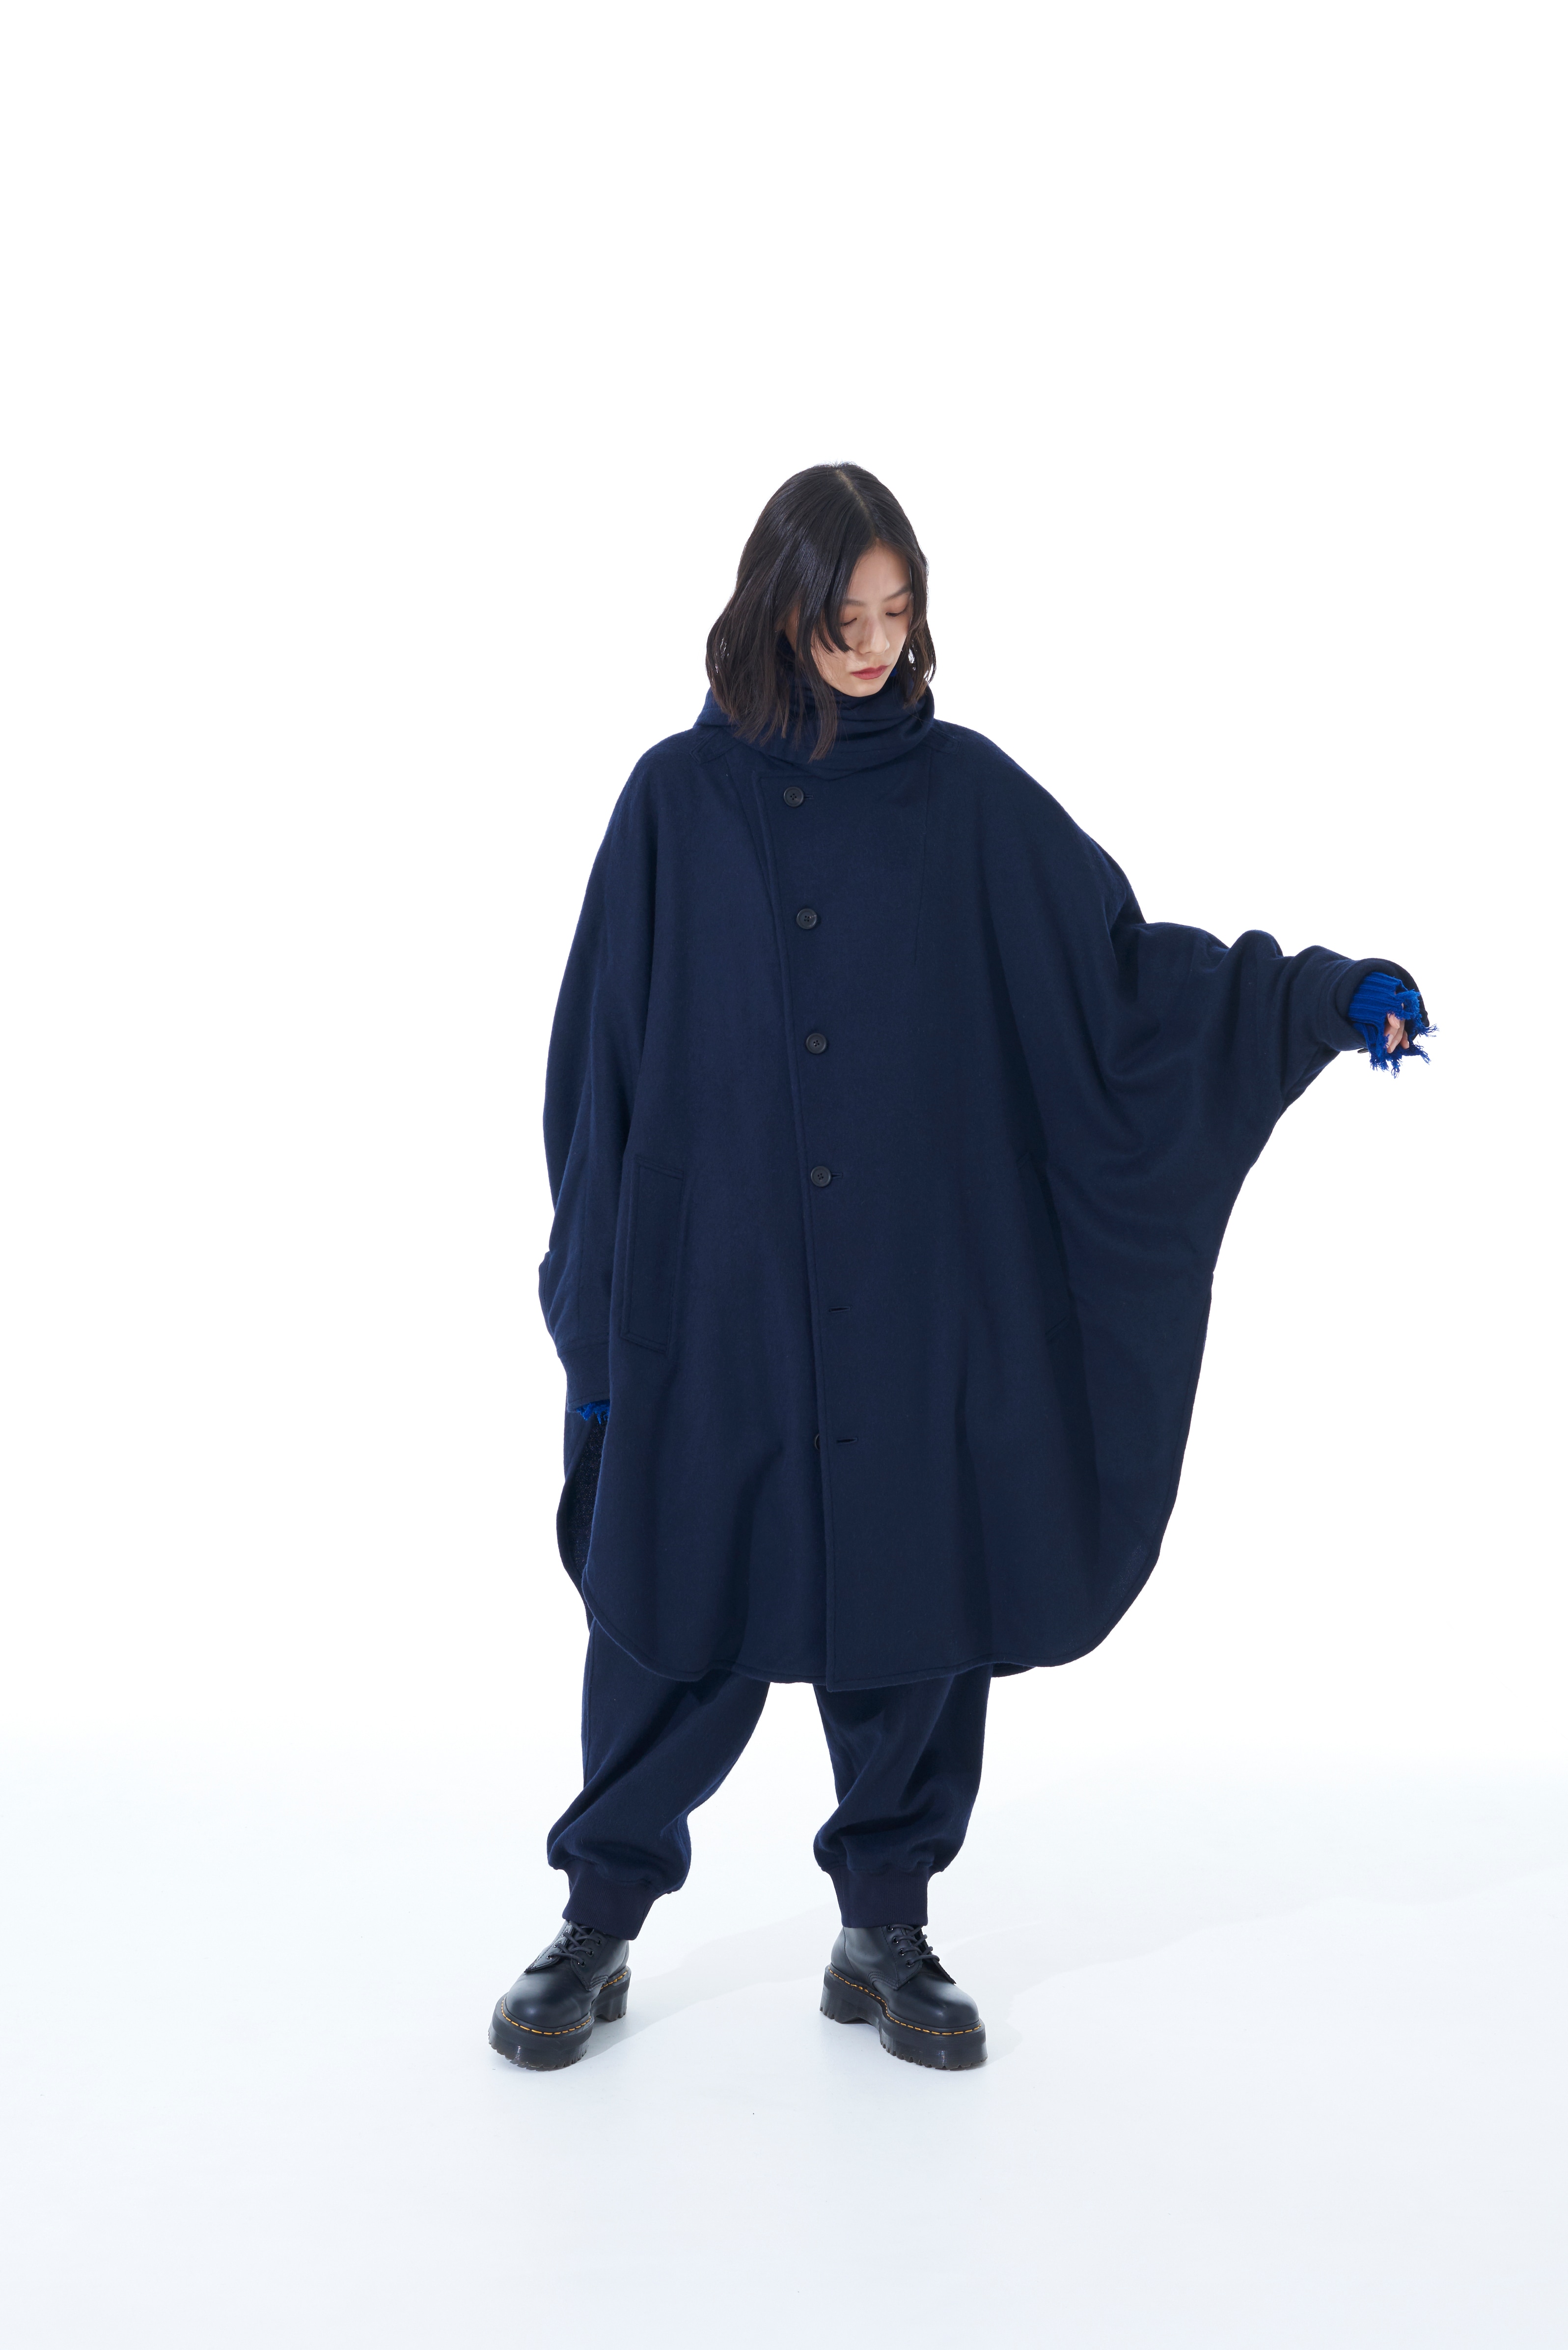 WOOL BEAVER STOLE COLLAR BIG SILHOUETTE COAT(M Navy): S'YTE｜THE